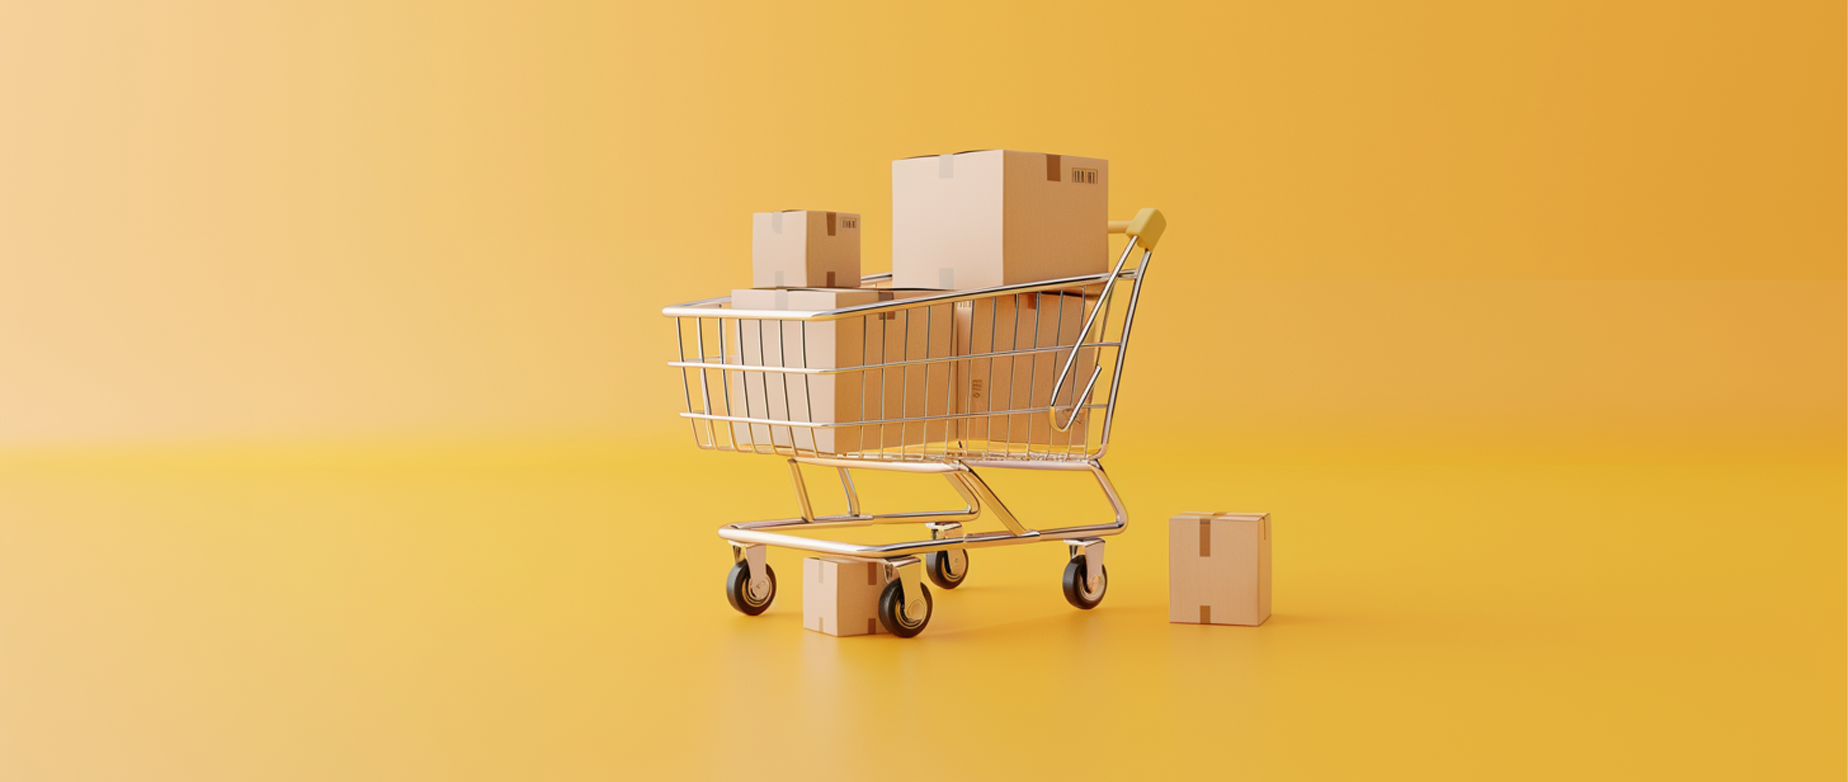 A shopping cart is filled with cardboard boxes to represent the concept of dropshipping.